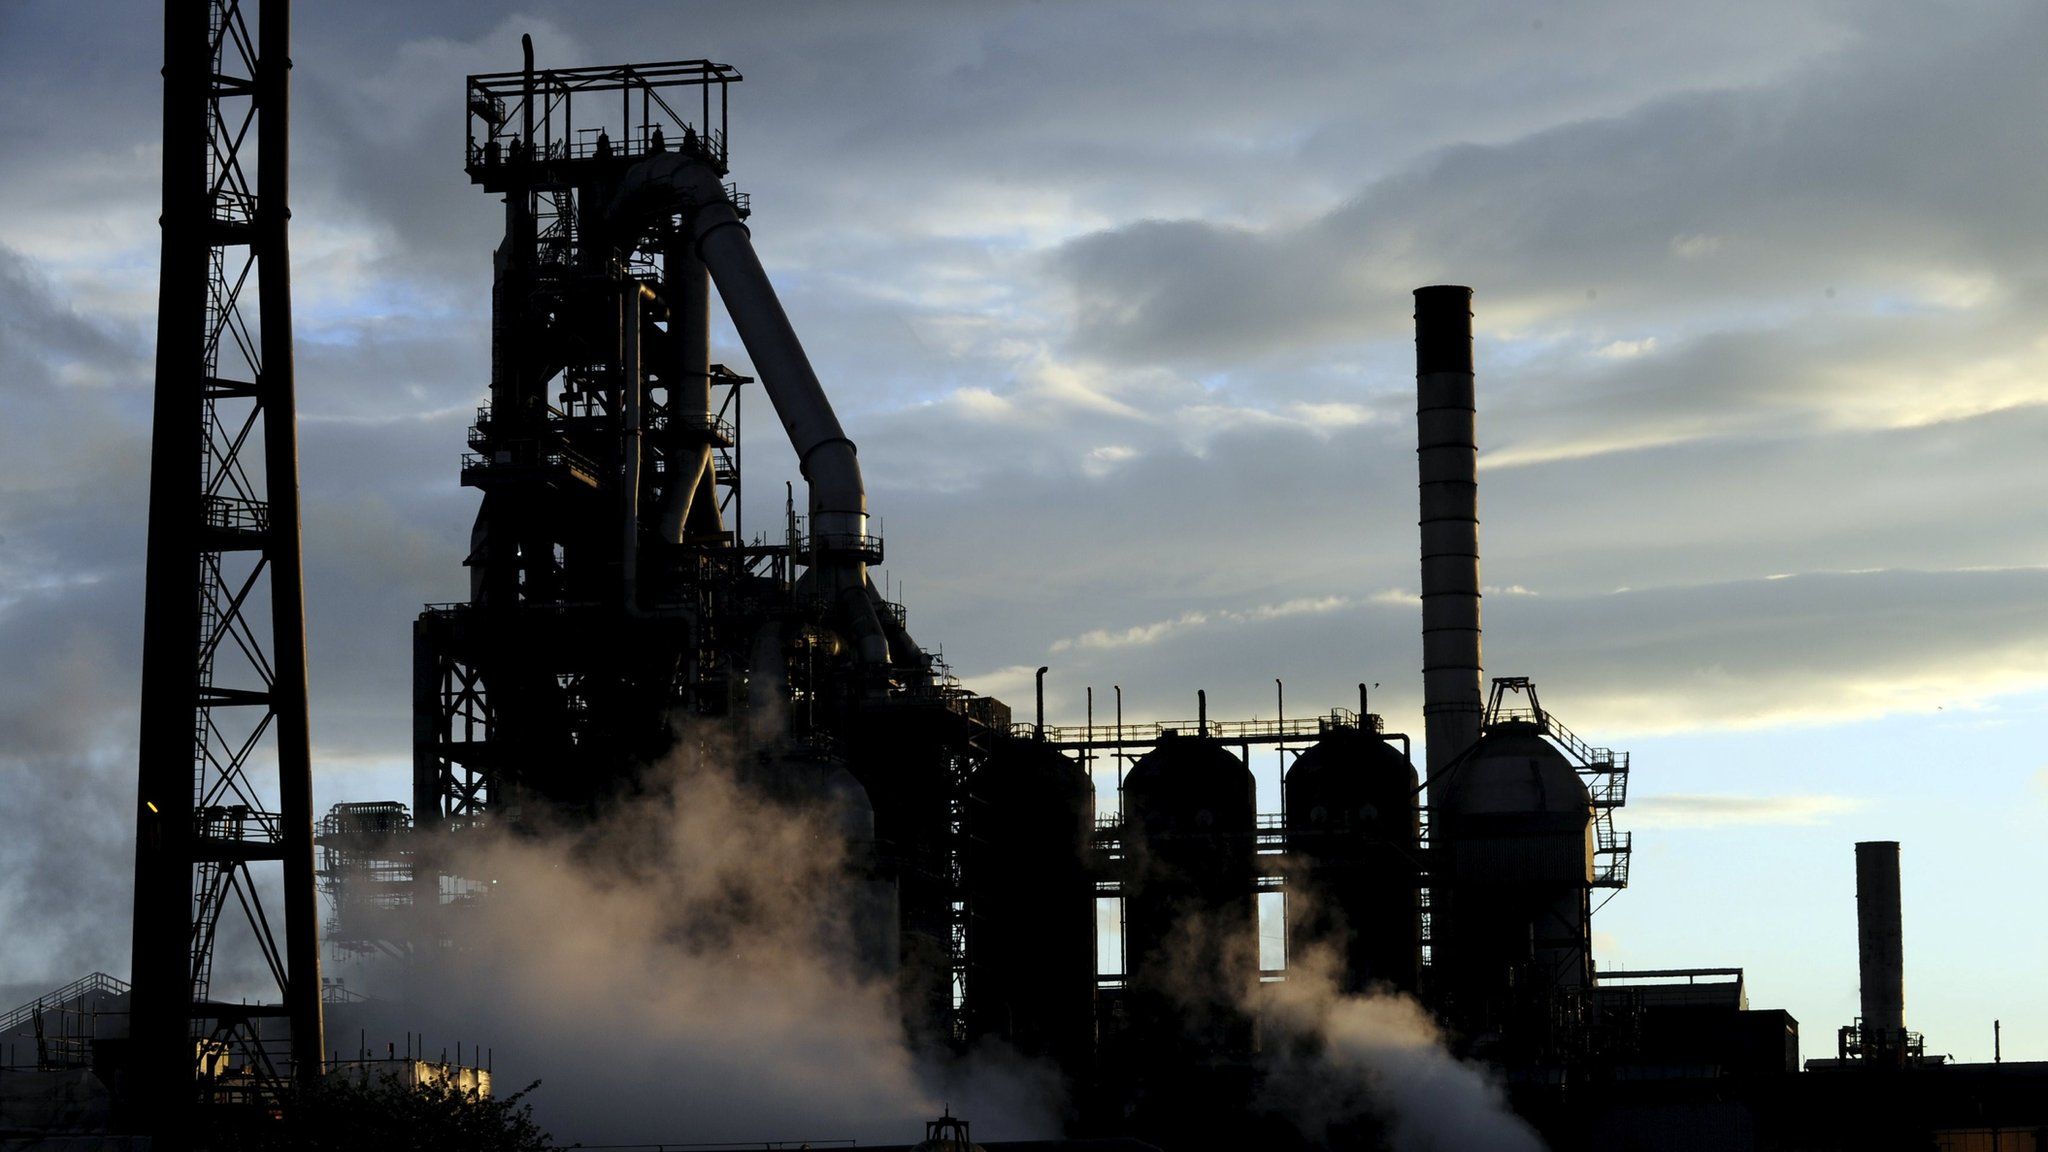 One of the blast furnaces at Port Talbot, South Wales